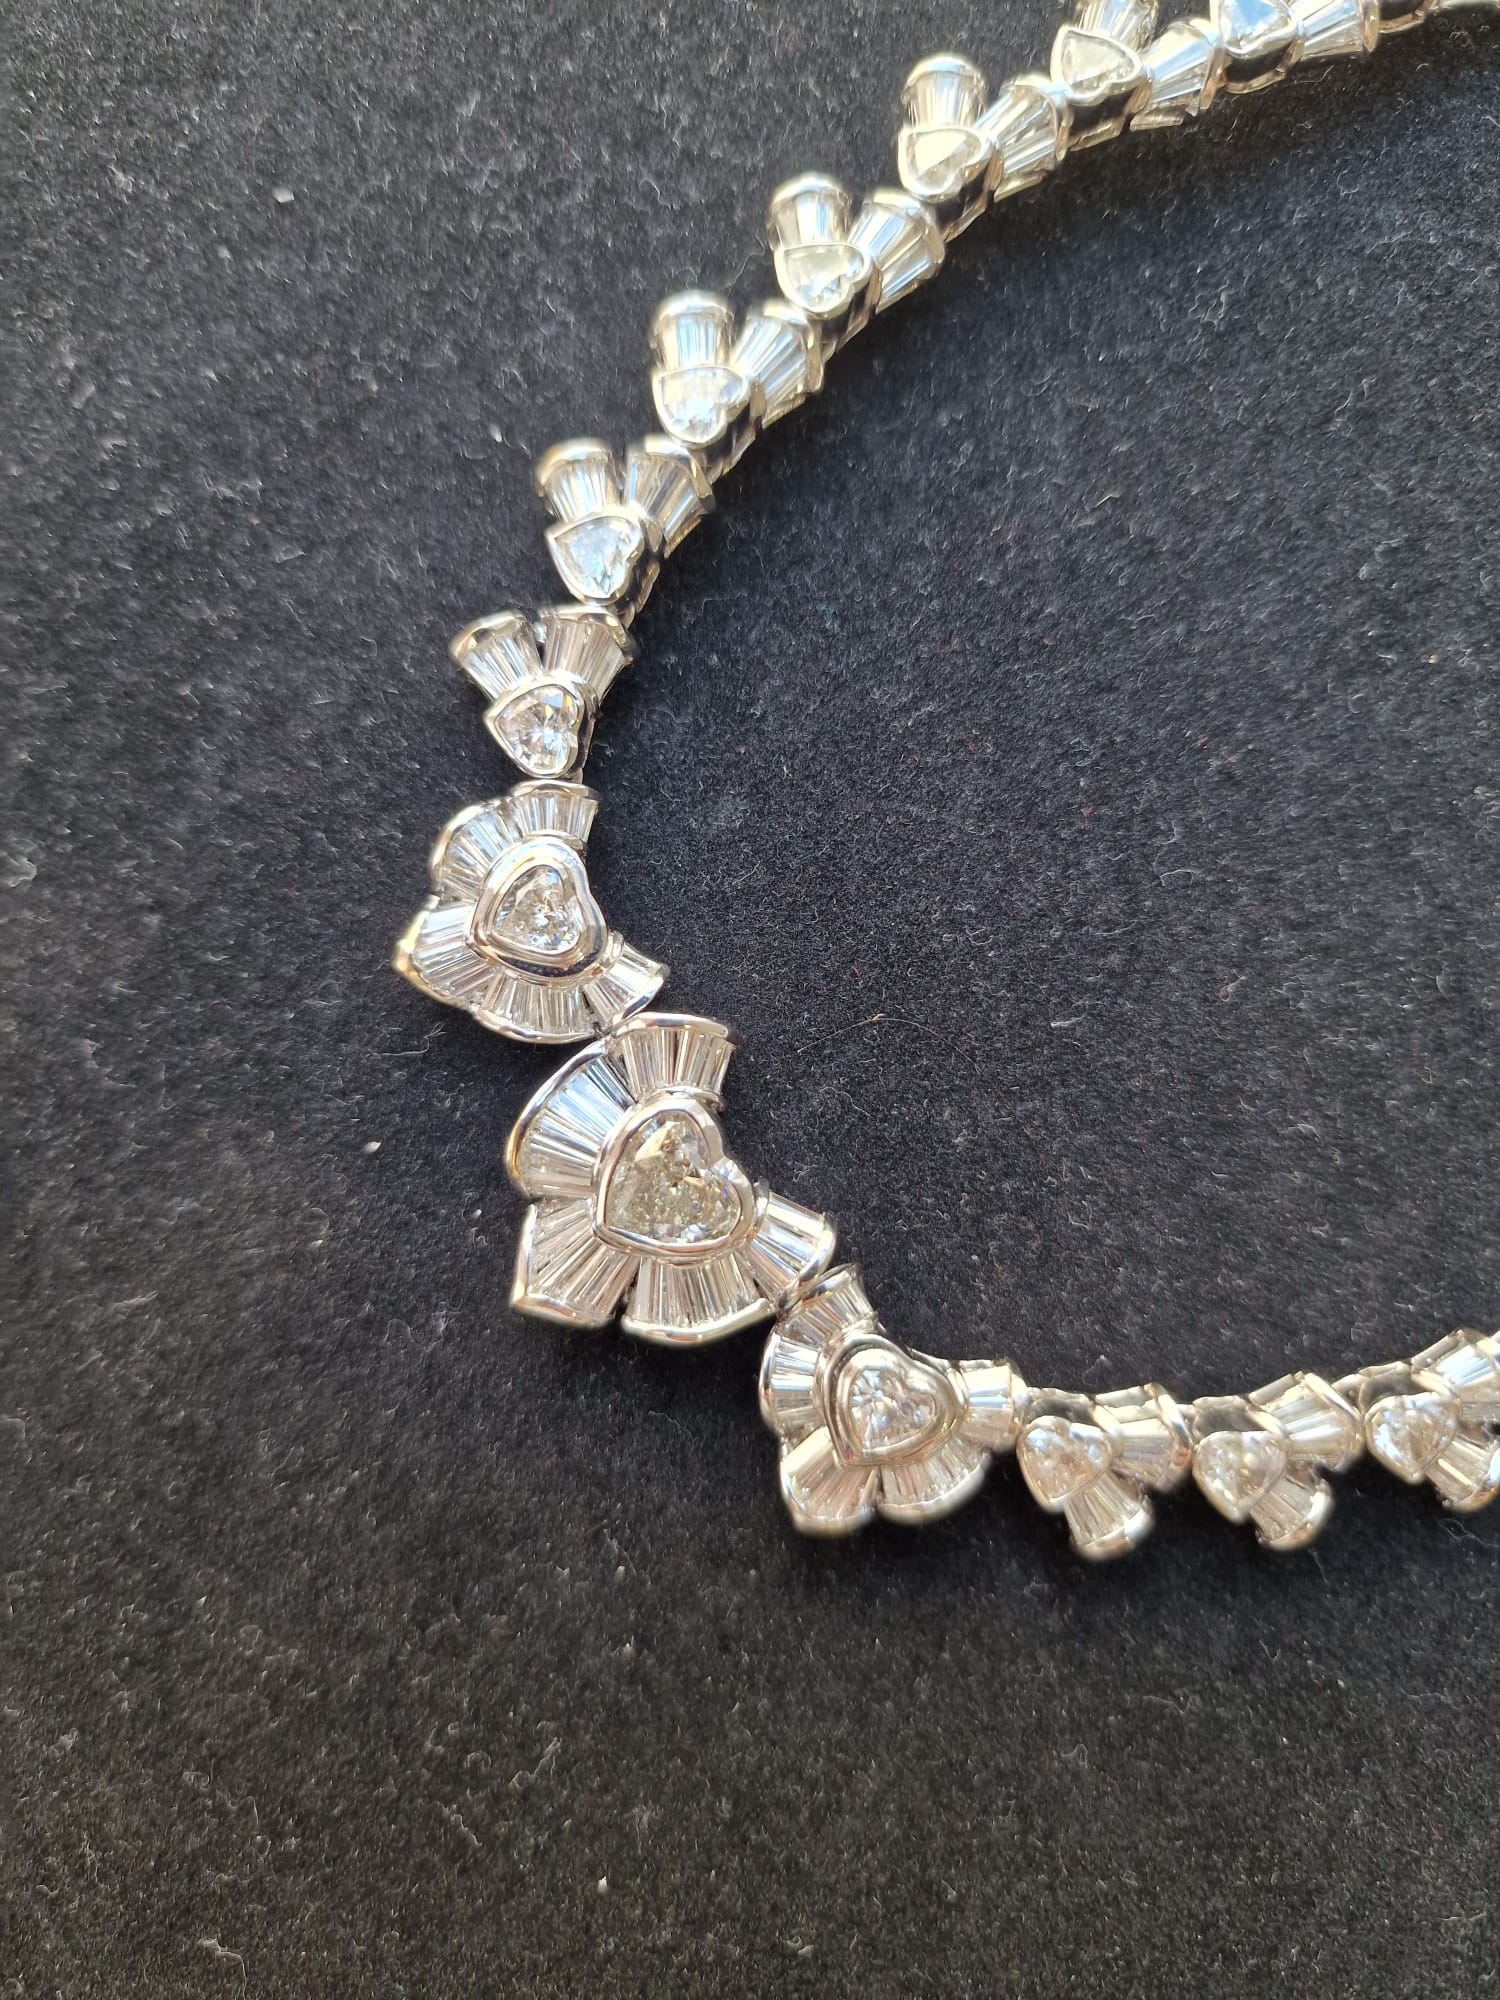 *** 40.00CT DIAMOND NECKLACE!!! WGI CERTIFICATED - SET IN 18K WHITE GOLD (60.94g Total Weight) - Image 8 of 8